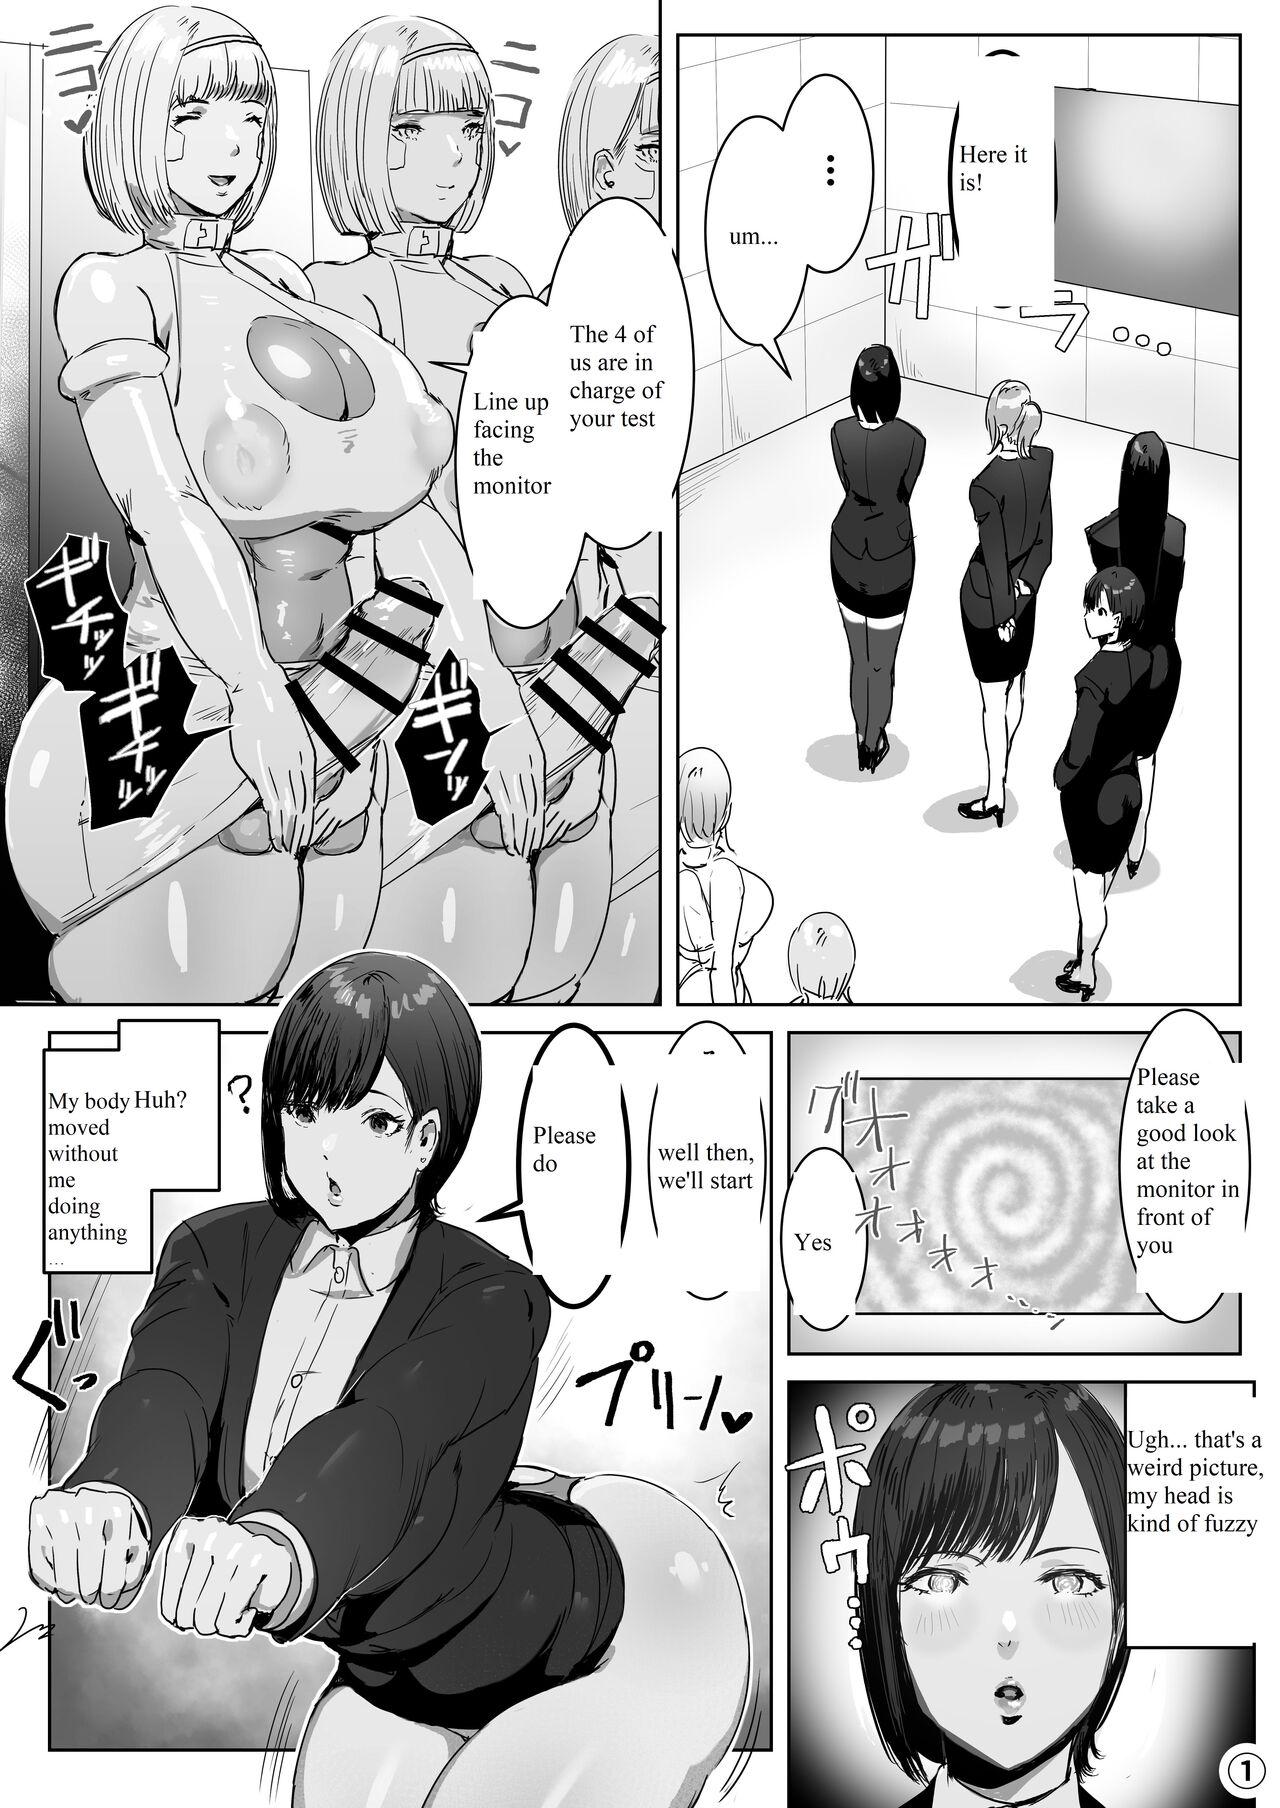 Pau Entering a Certain Tech Company, I Was Made to Inherit an Futa-Android. - Original Office - Page 4